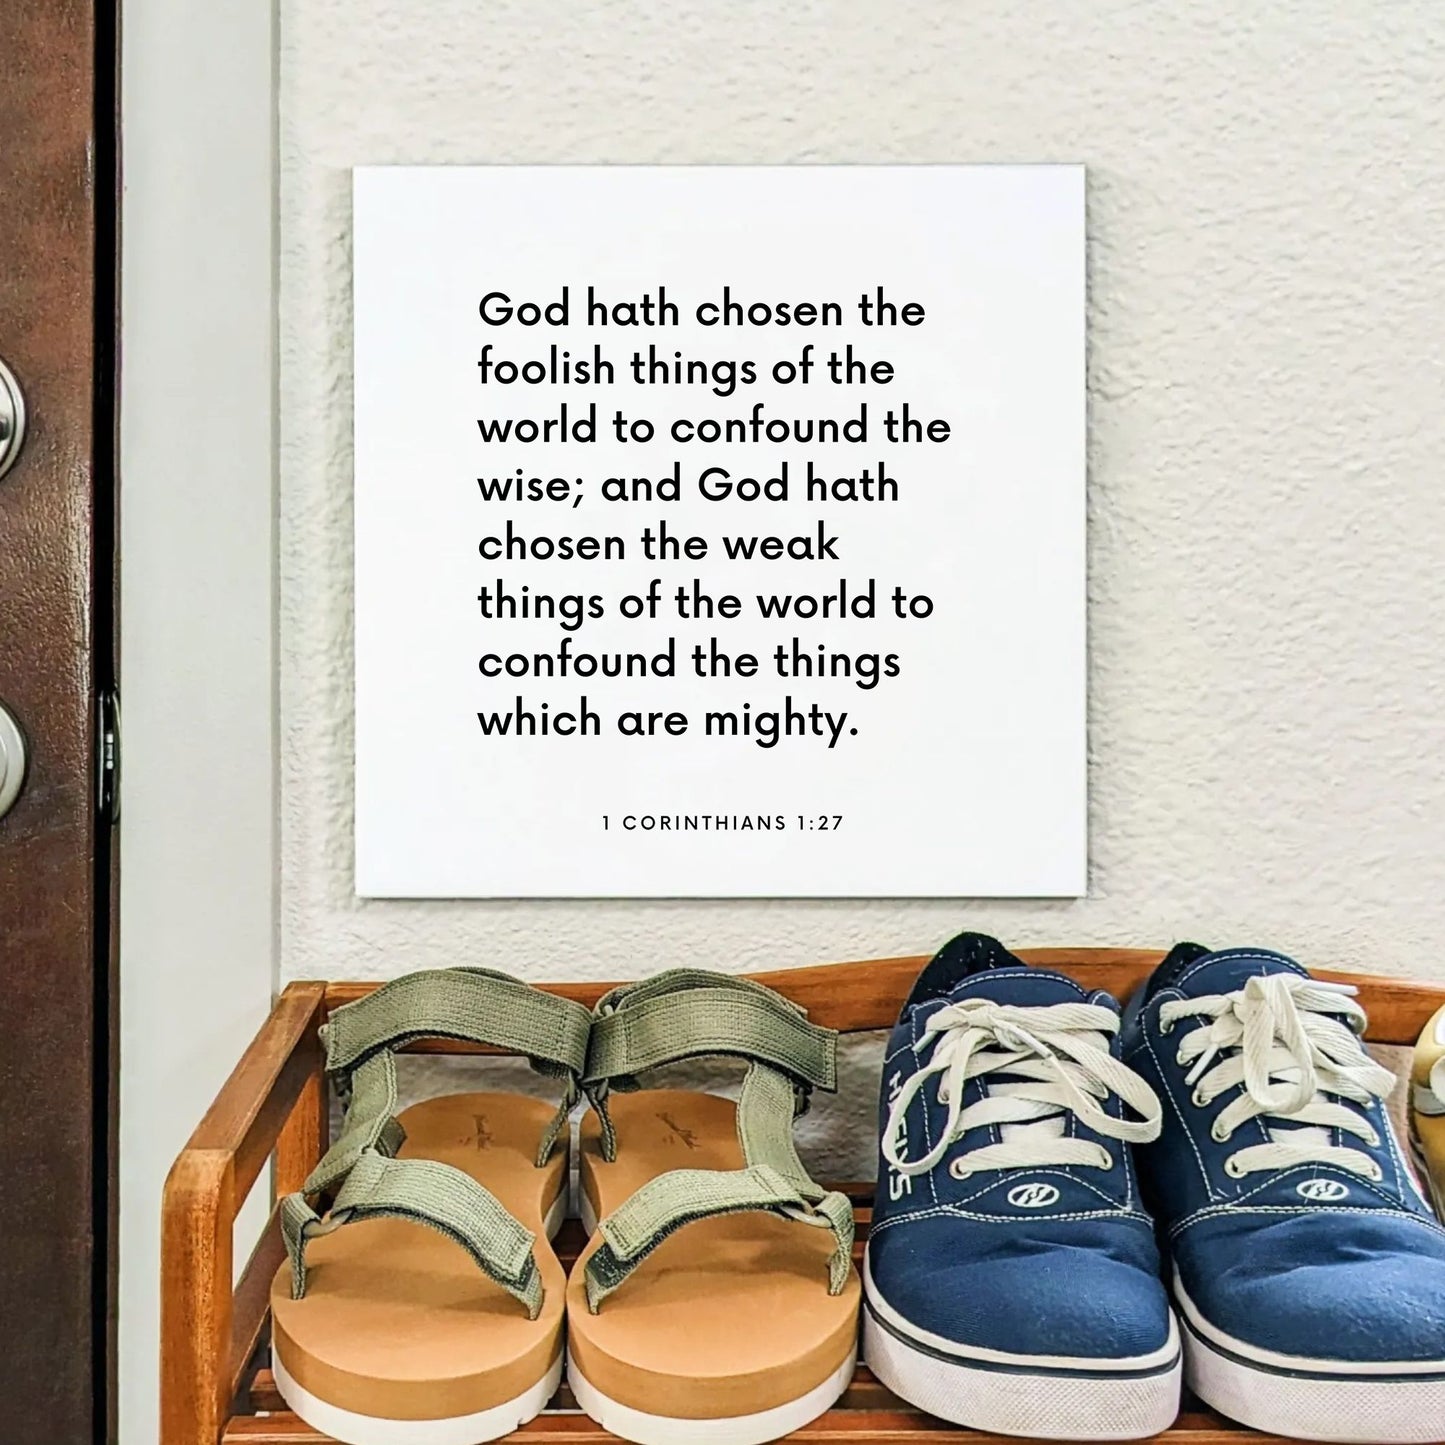 Shoes mouting of the scripture tile for 1 Corinthians 1:27 - "God hath chosen the foolish things of the world"